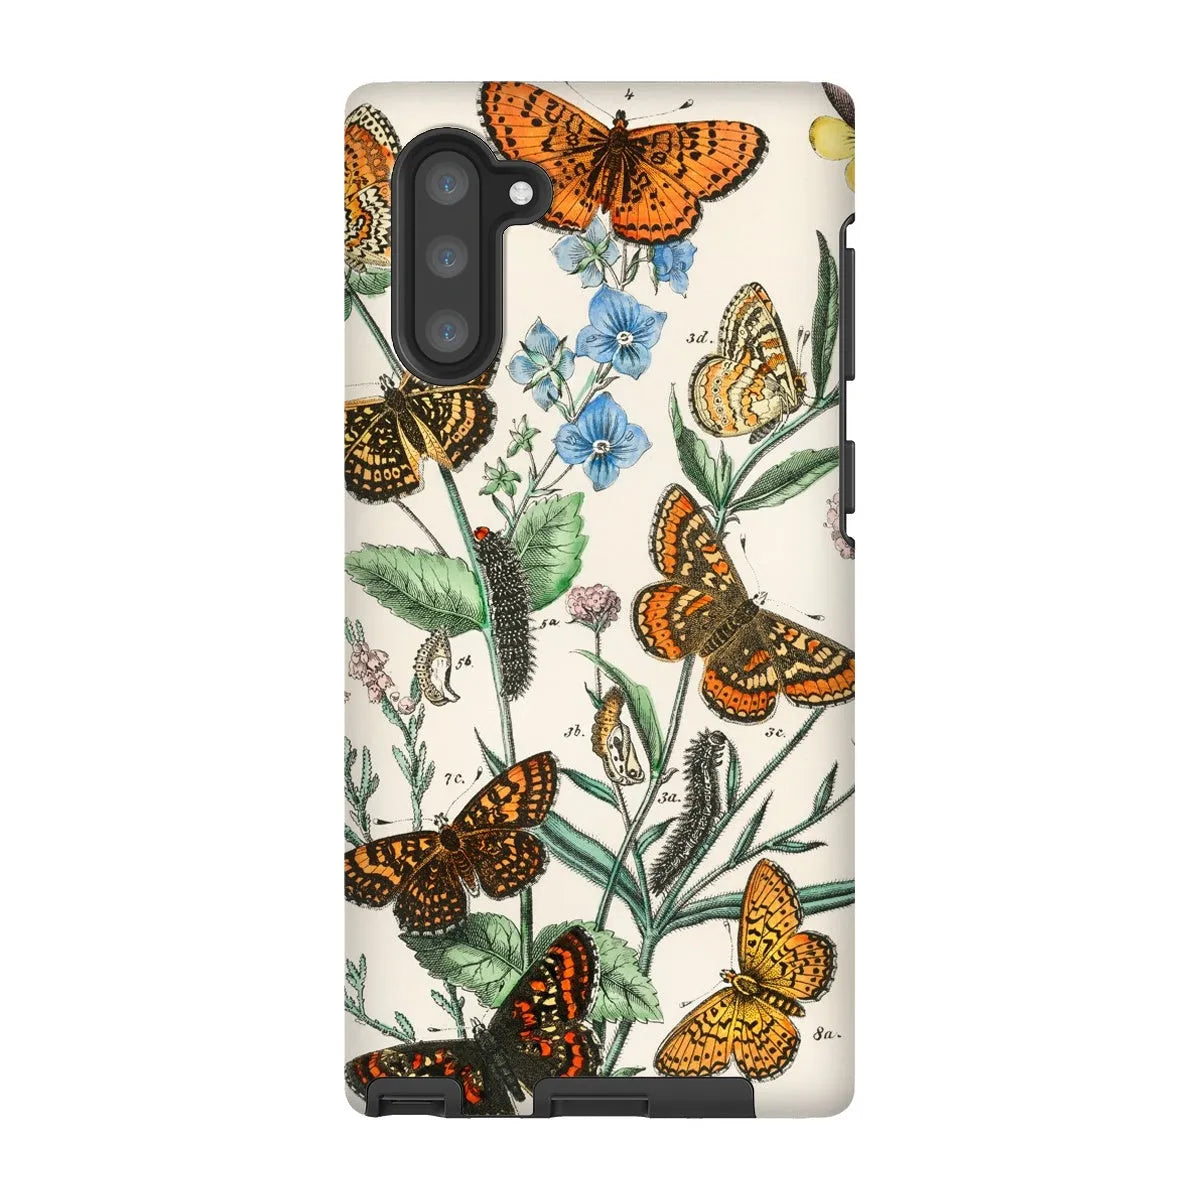 This Butterfly Aesthetic Art Phone Case - William Forsell Kirby - Samsung Galaxy Note 10 / Matte - Mobile Phone Cases